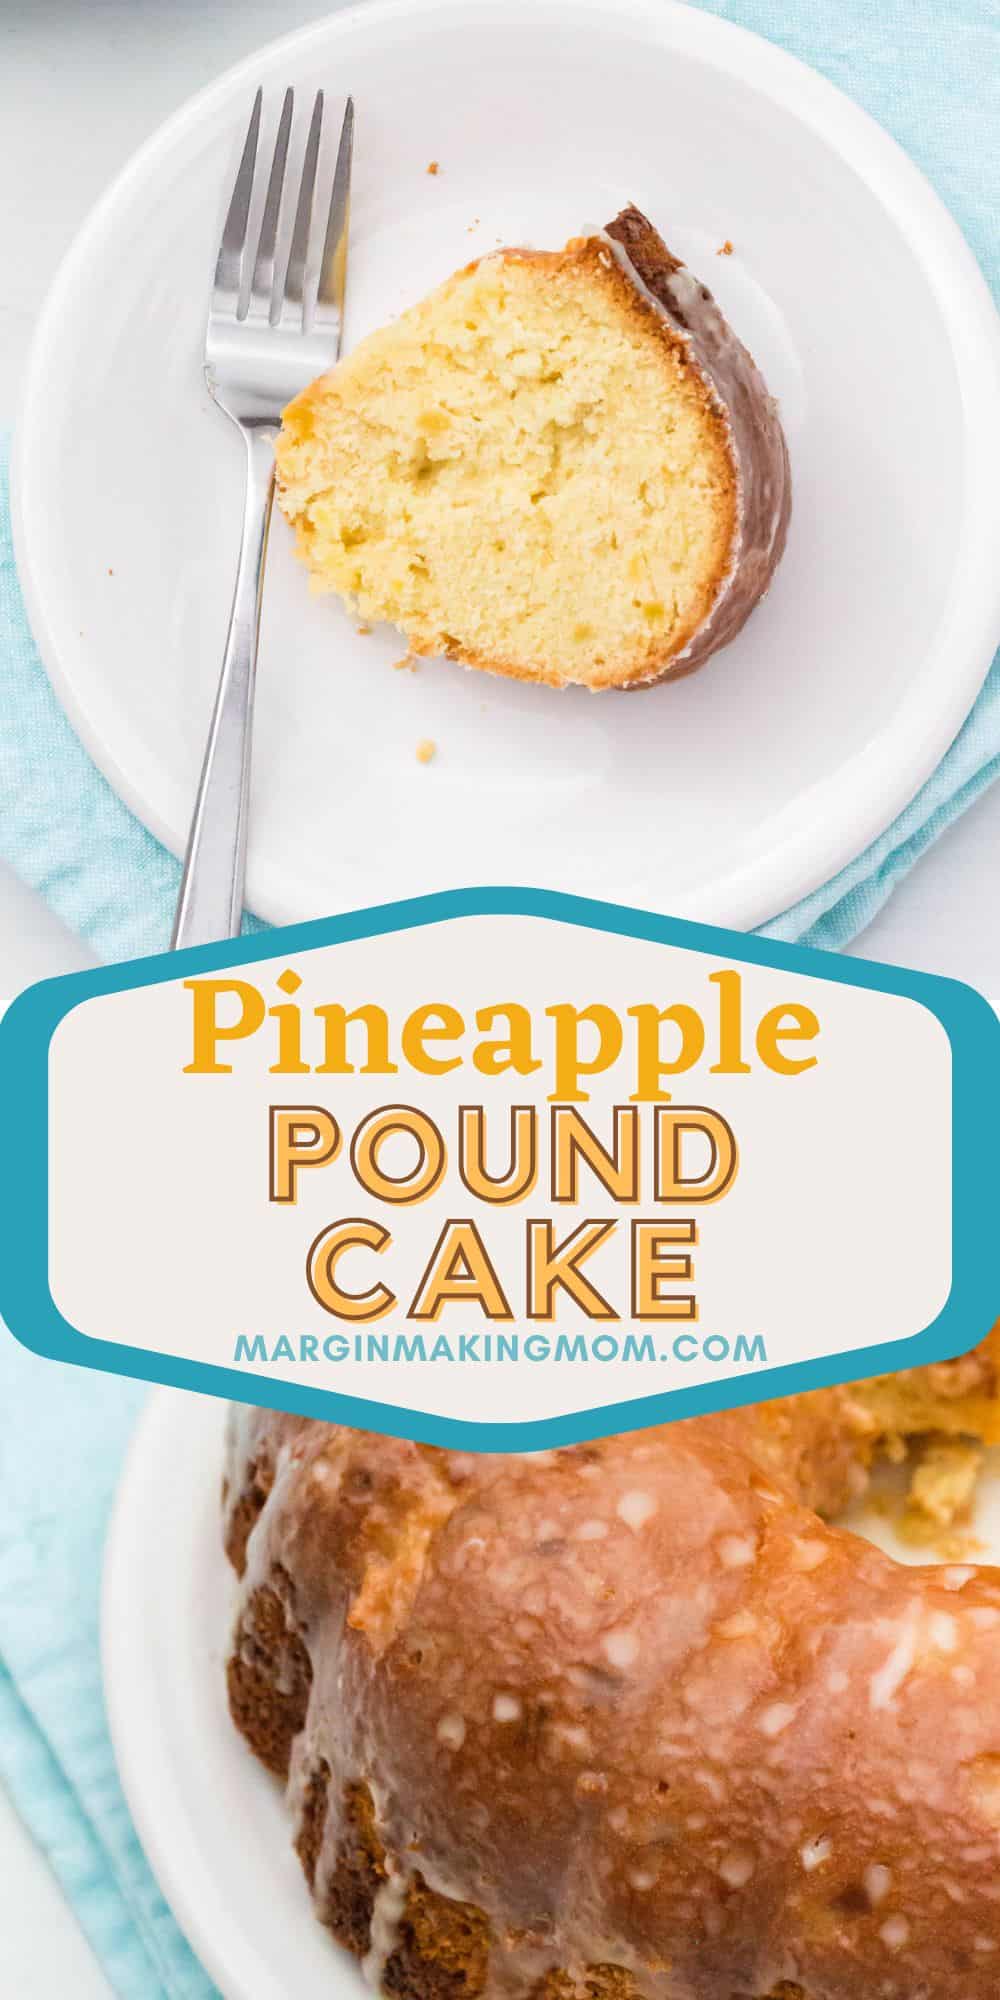 two photos; one shows part of a pineapple pound cake, the other shows a slice of the bundt cake served on a white plate with a fork.